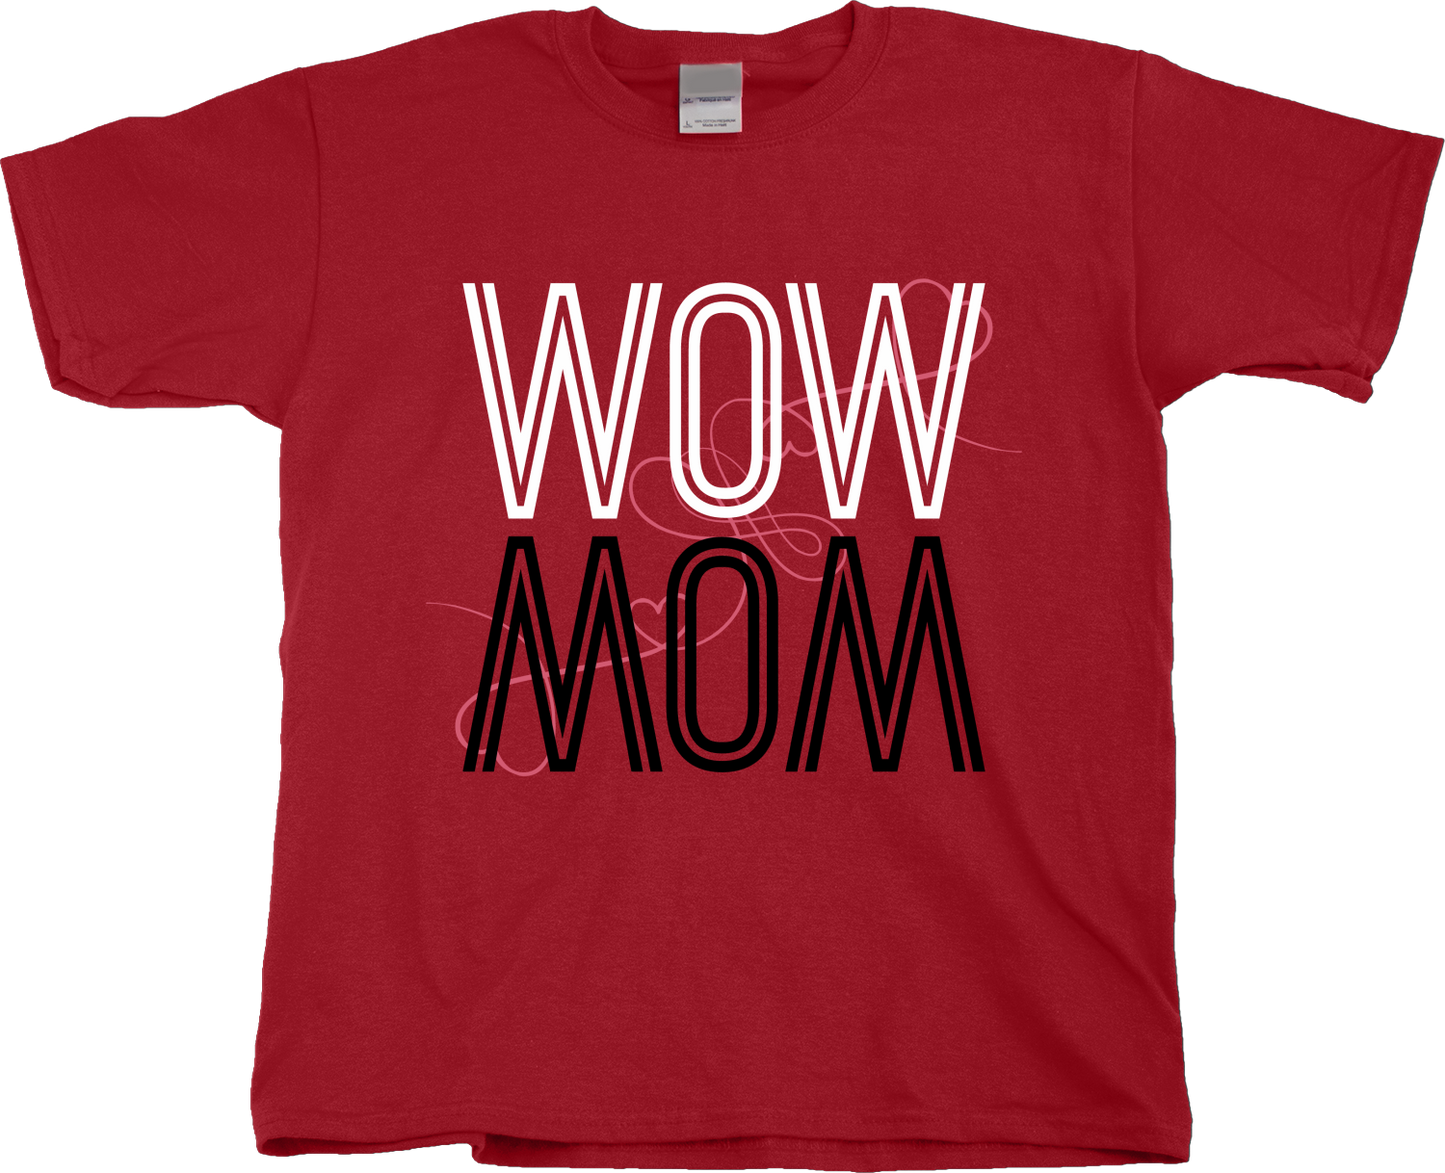 Youth Red Wow/Mom - Mother's Day Gift New Mom Love Mother Wordplay Fun 